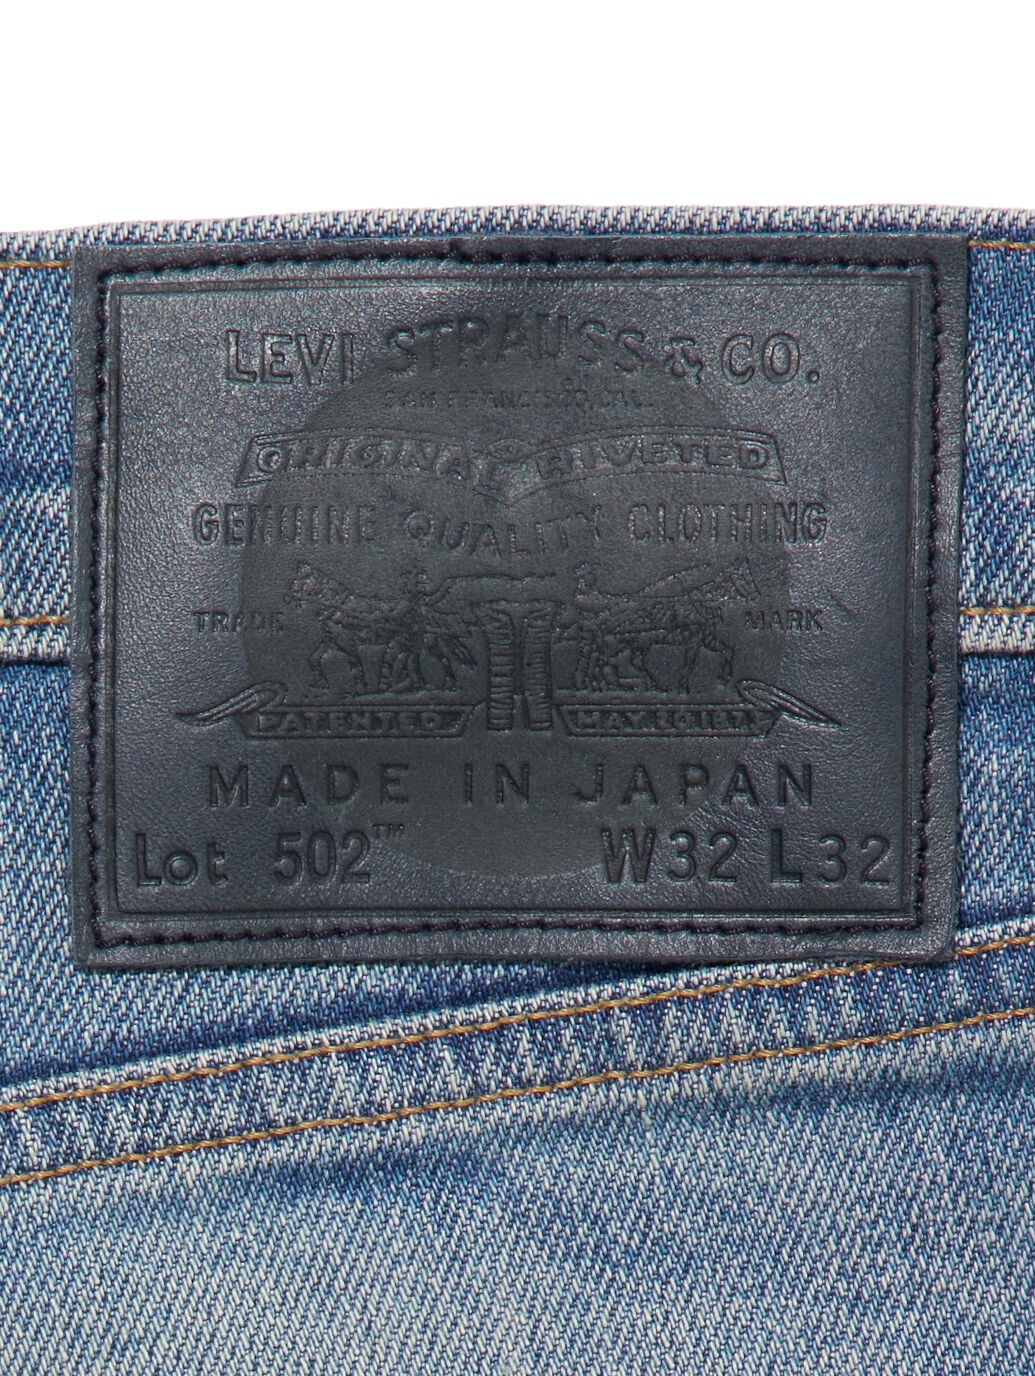 Levi's 502 MADE IN JAPAN W32 L32